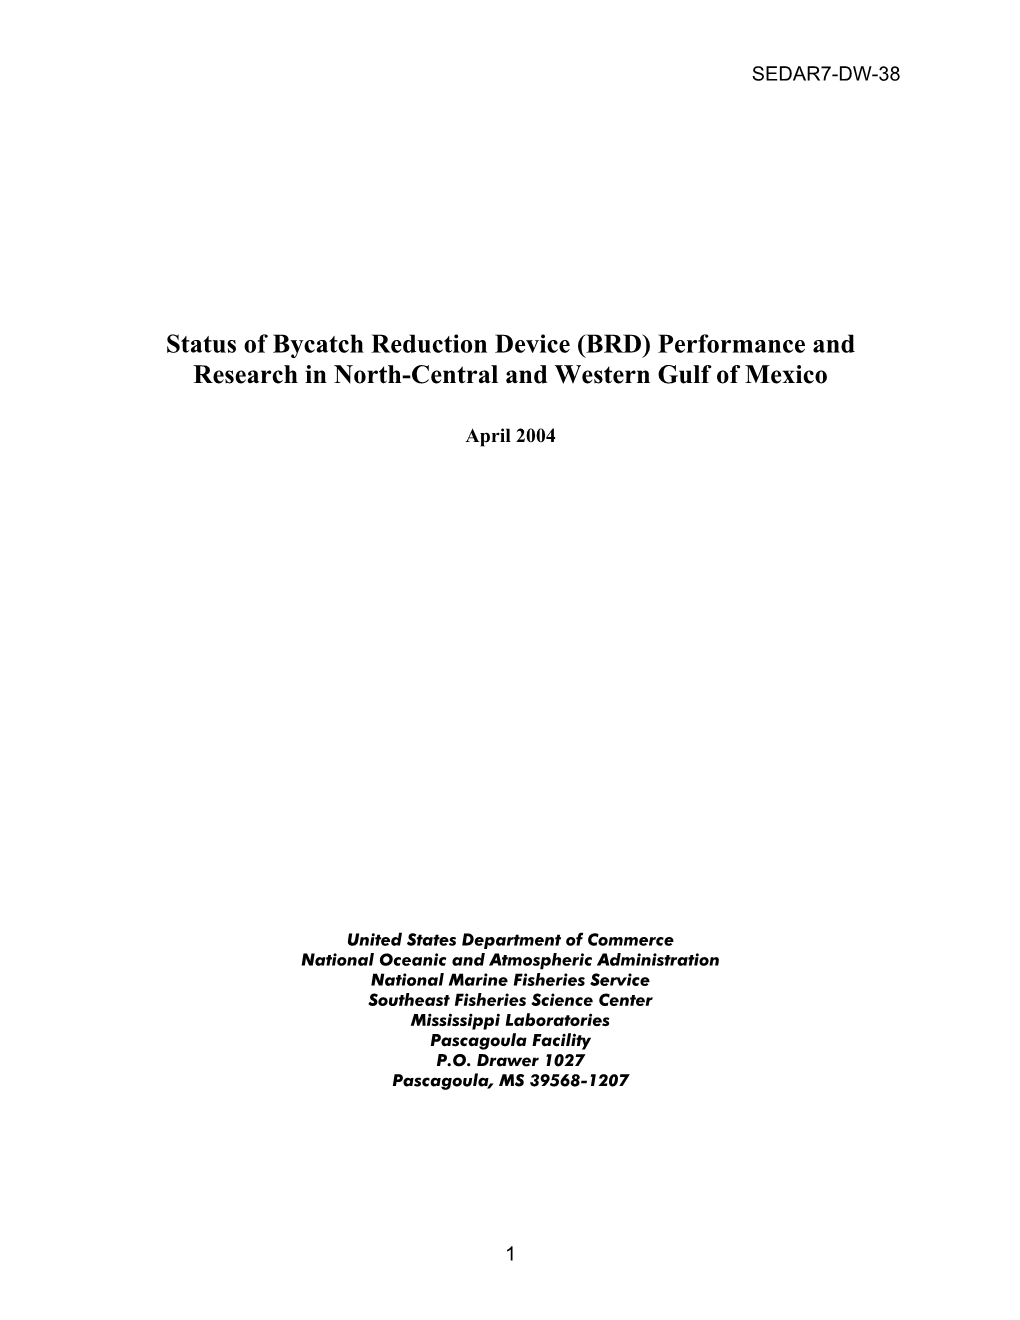 Status of Bycatch Reduction Device (BRD) Performance and Research in North-Central and Western Gulf of Mexico